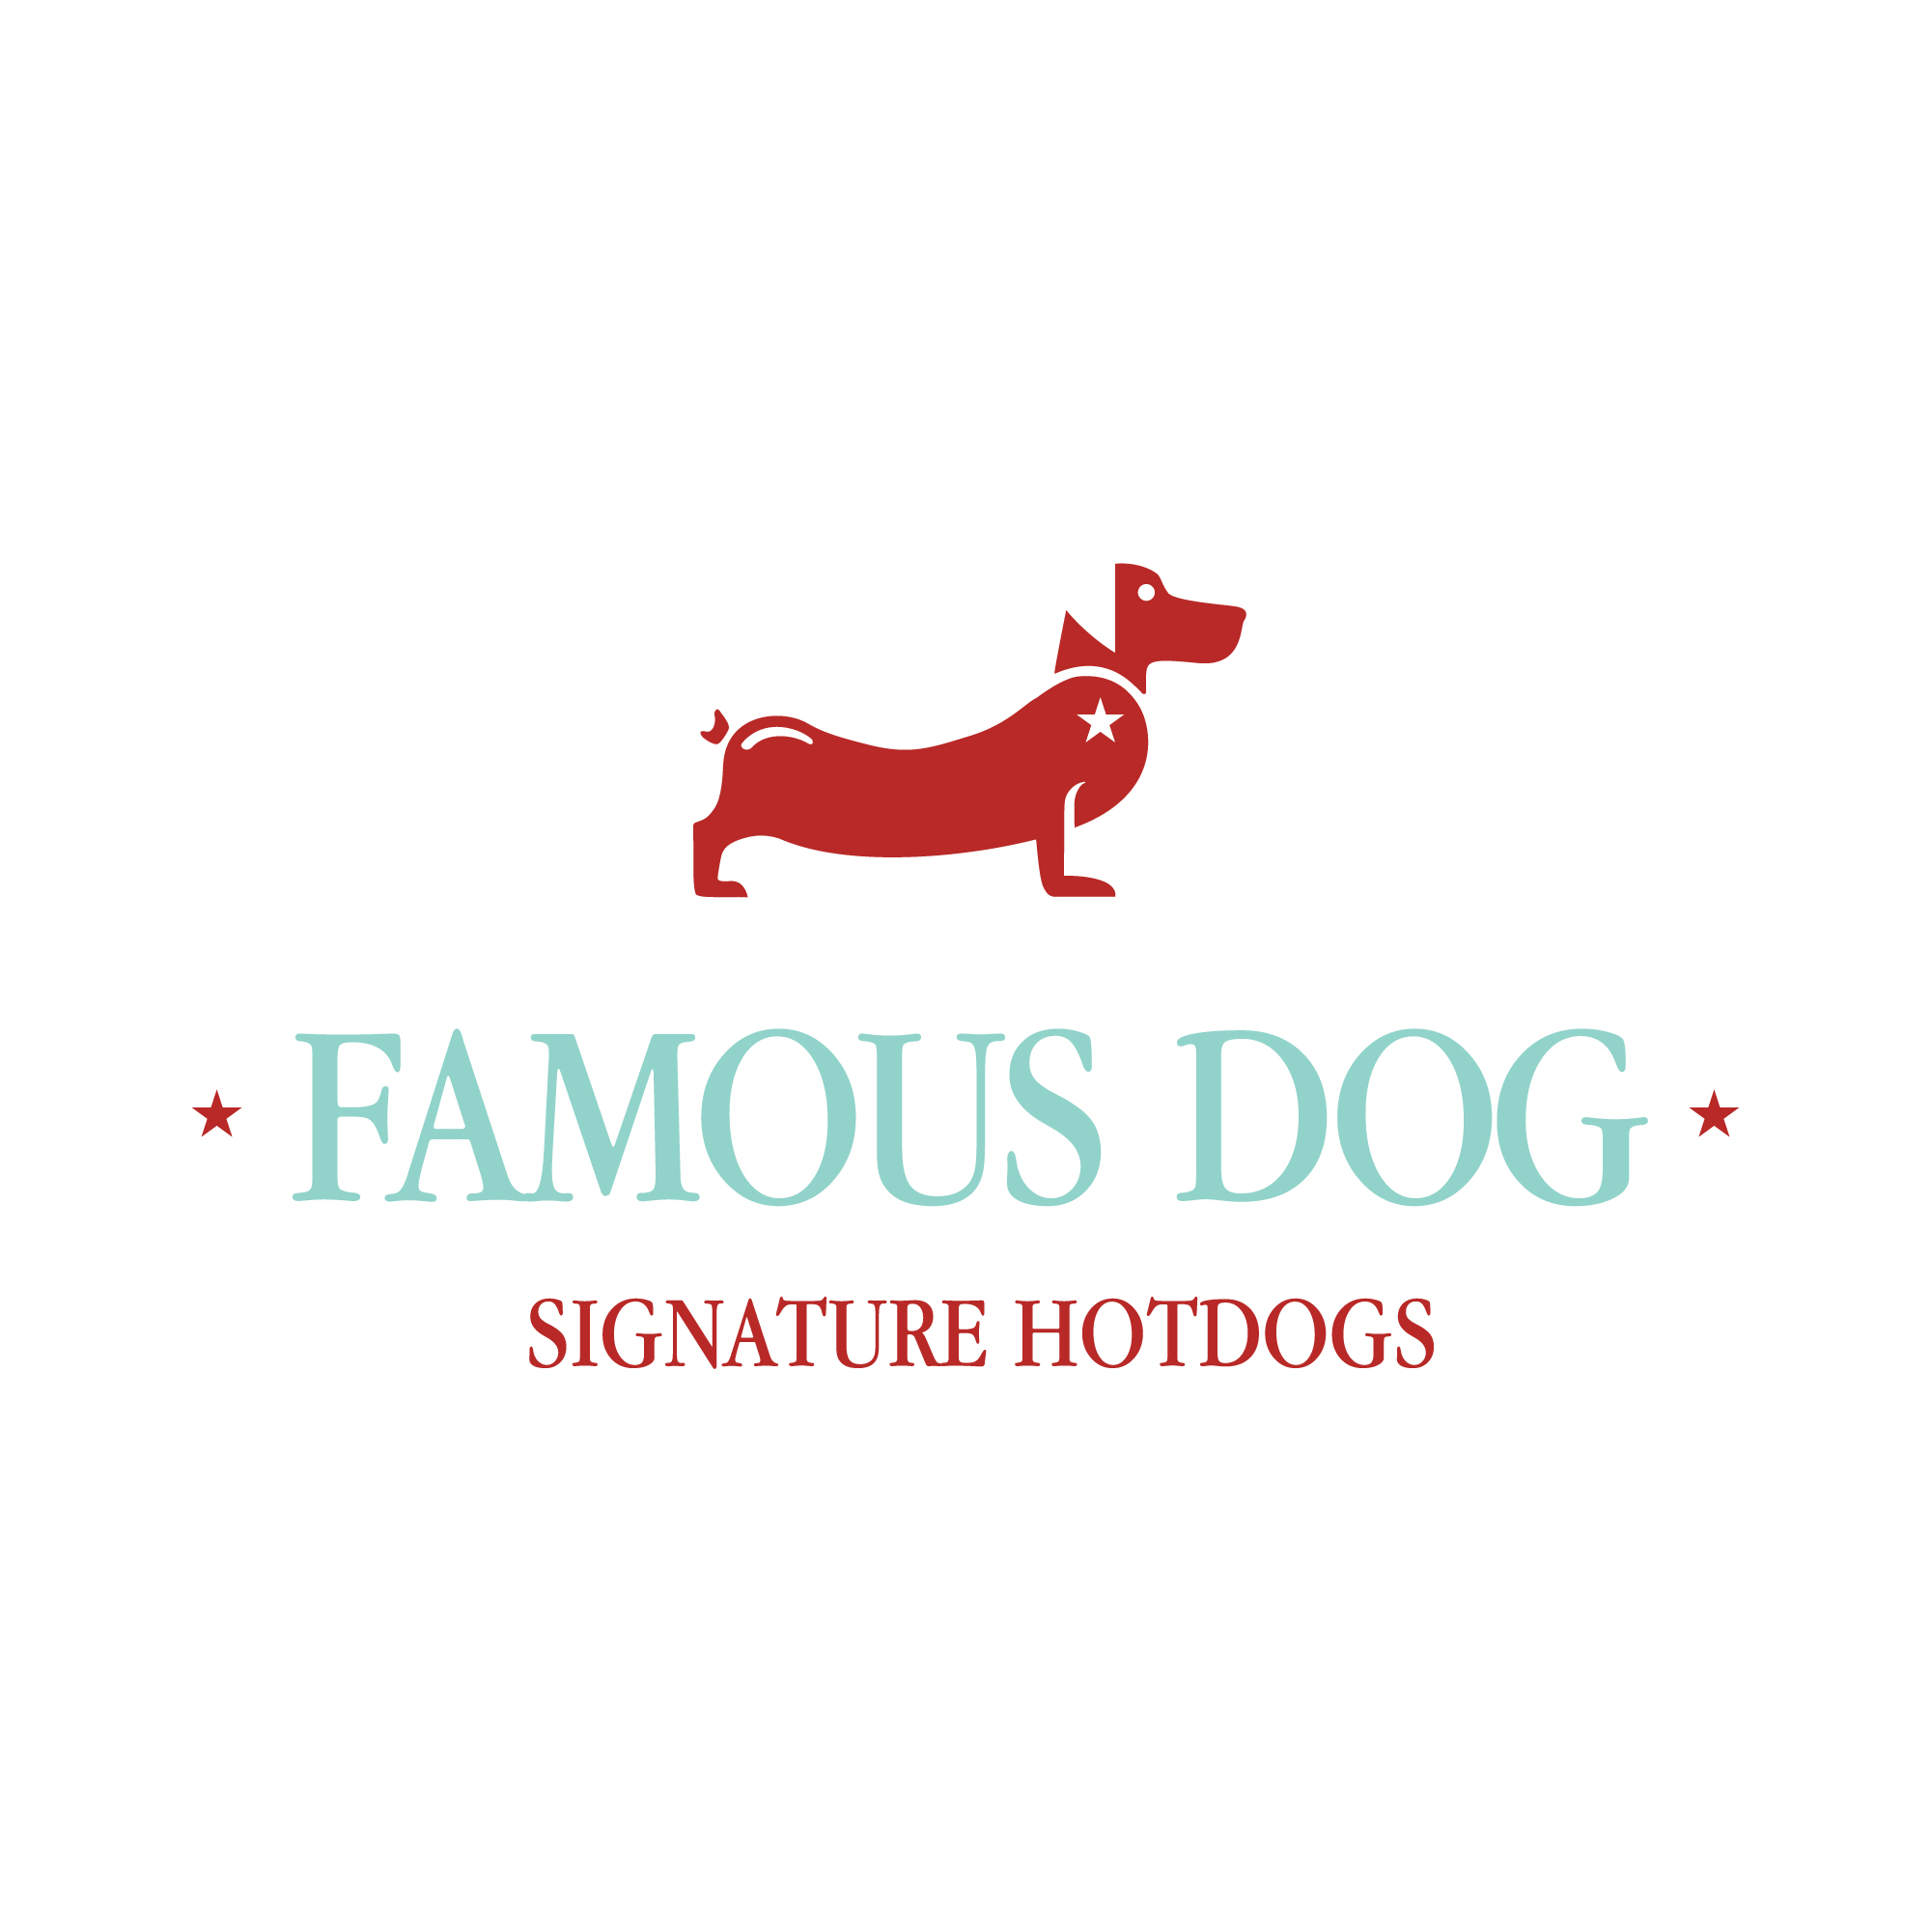 THE FAMOUS DOG - lettering (2016)